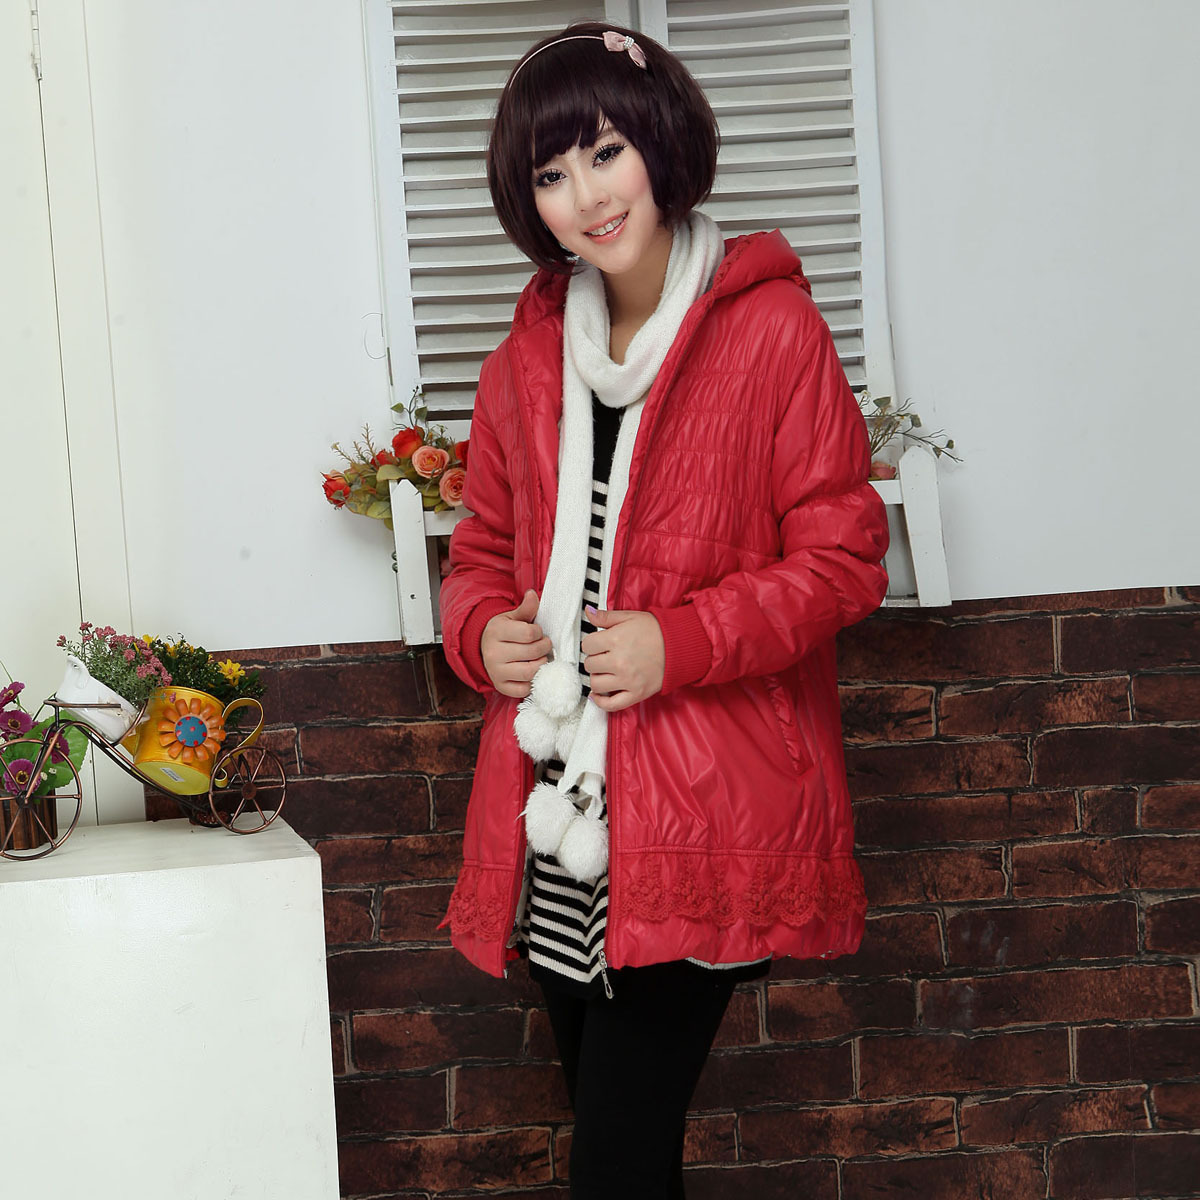 Maternity clothing winter   jacket thermal  overcoat fashion outerwear thickening  free shipping